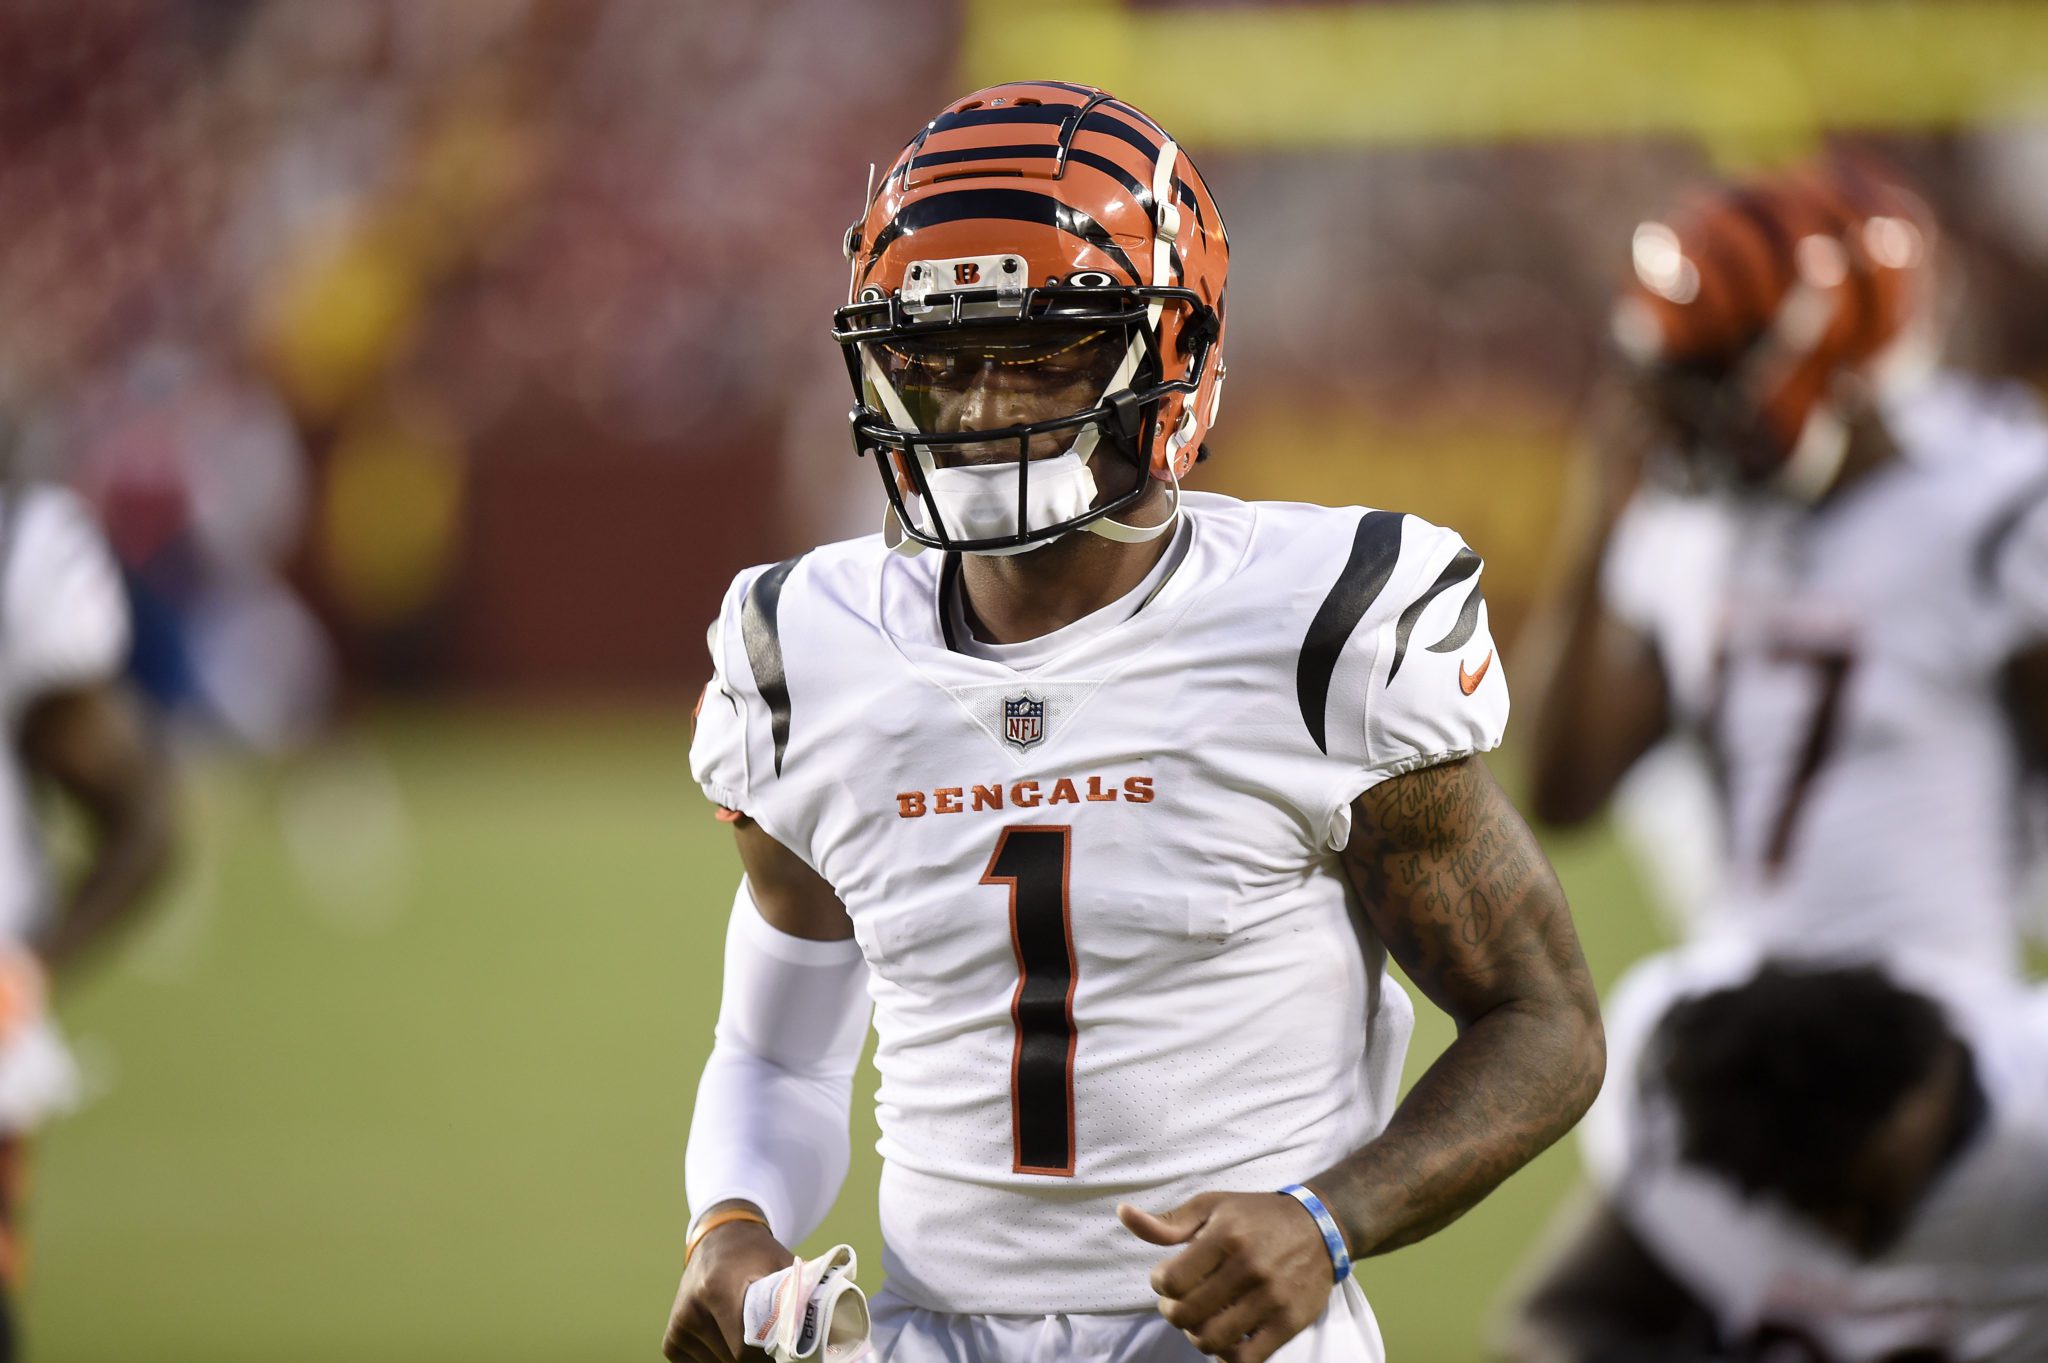 Cincinnati Bengals rookie wide receiver had a rough preseason, but can he rebound? Many fantasy football players are hoping he balls out this season.